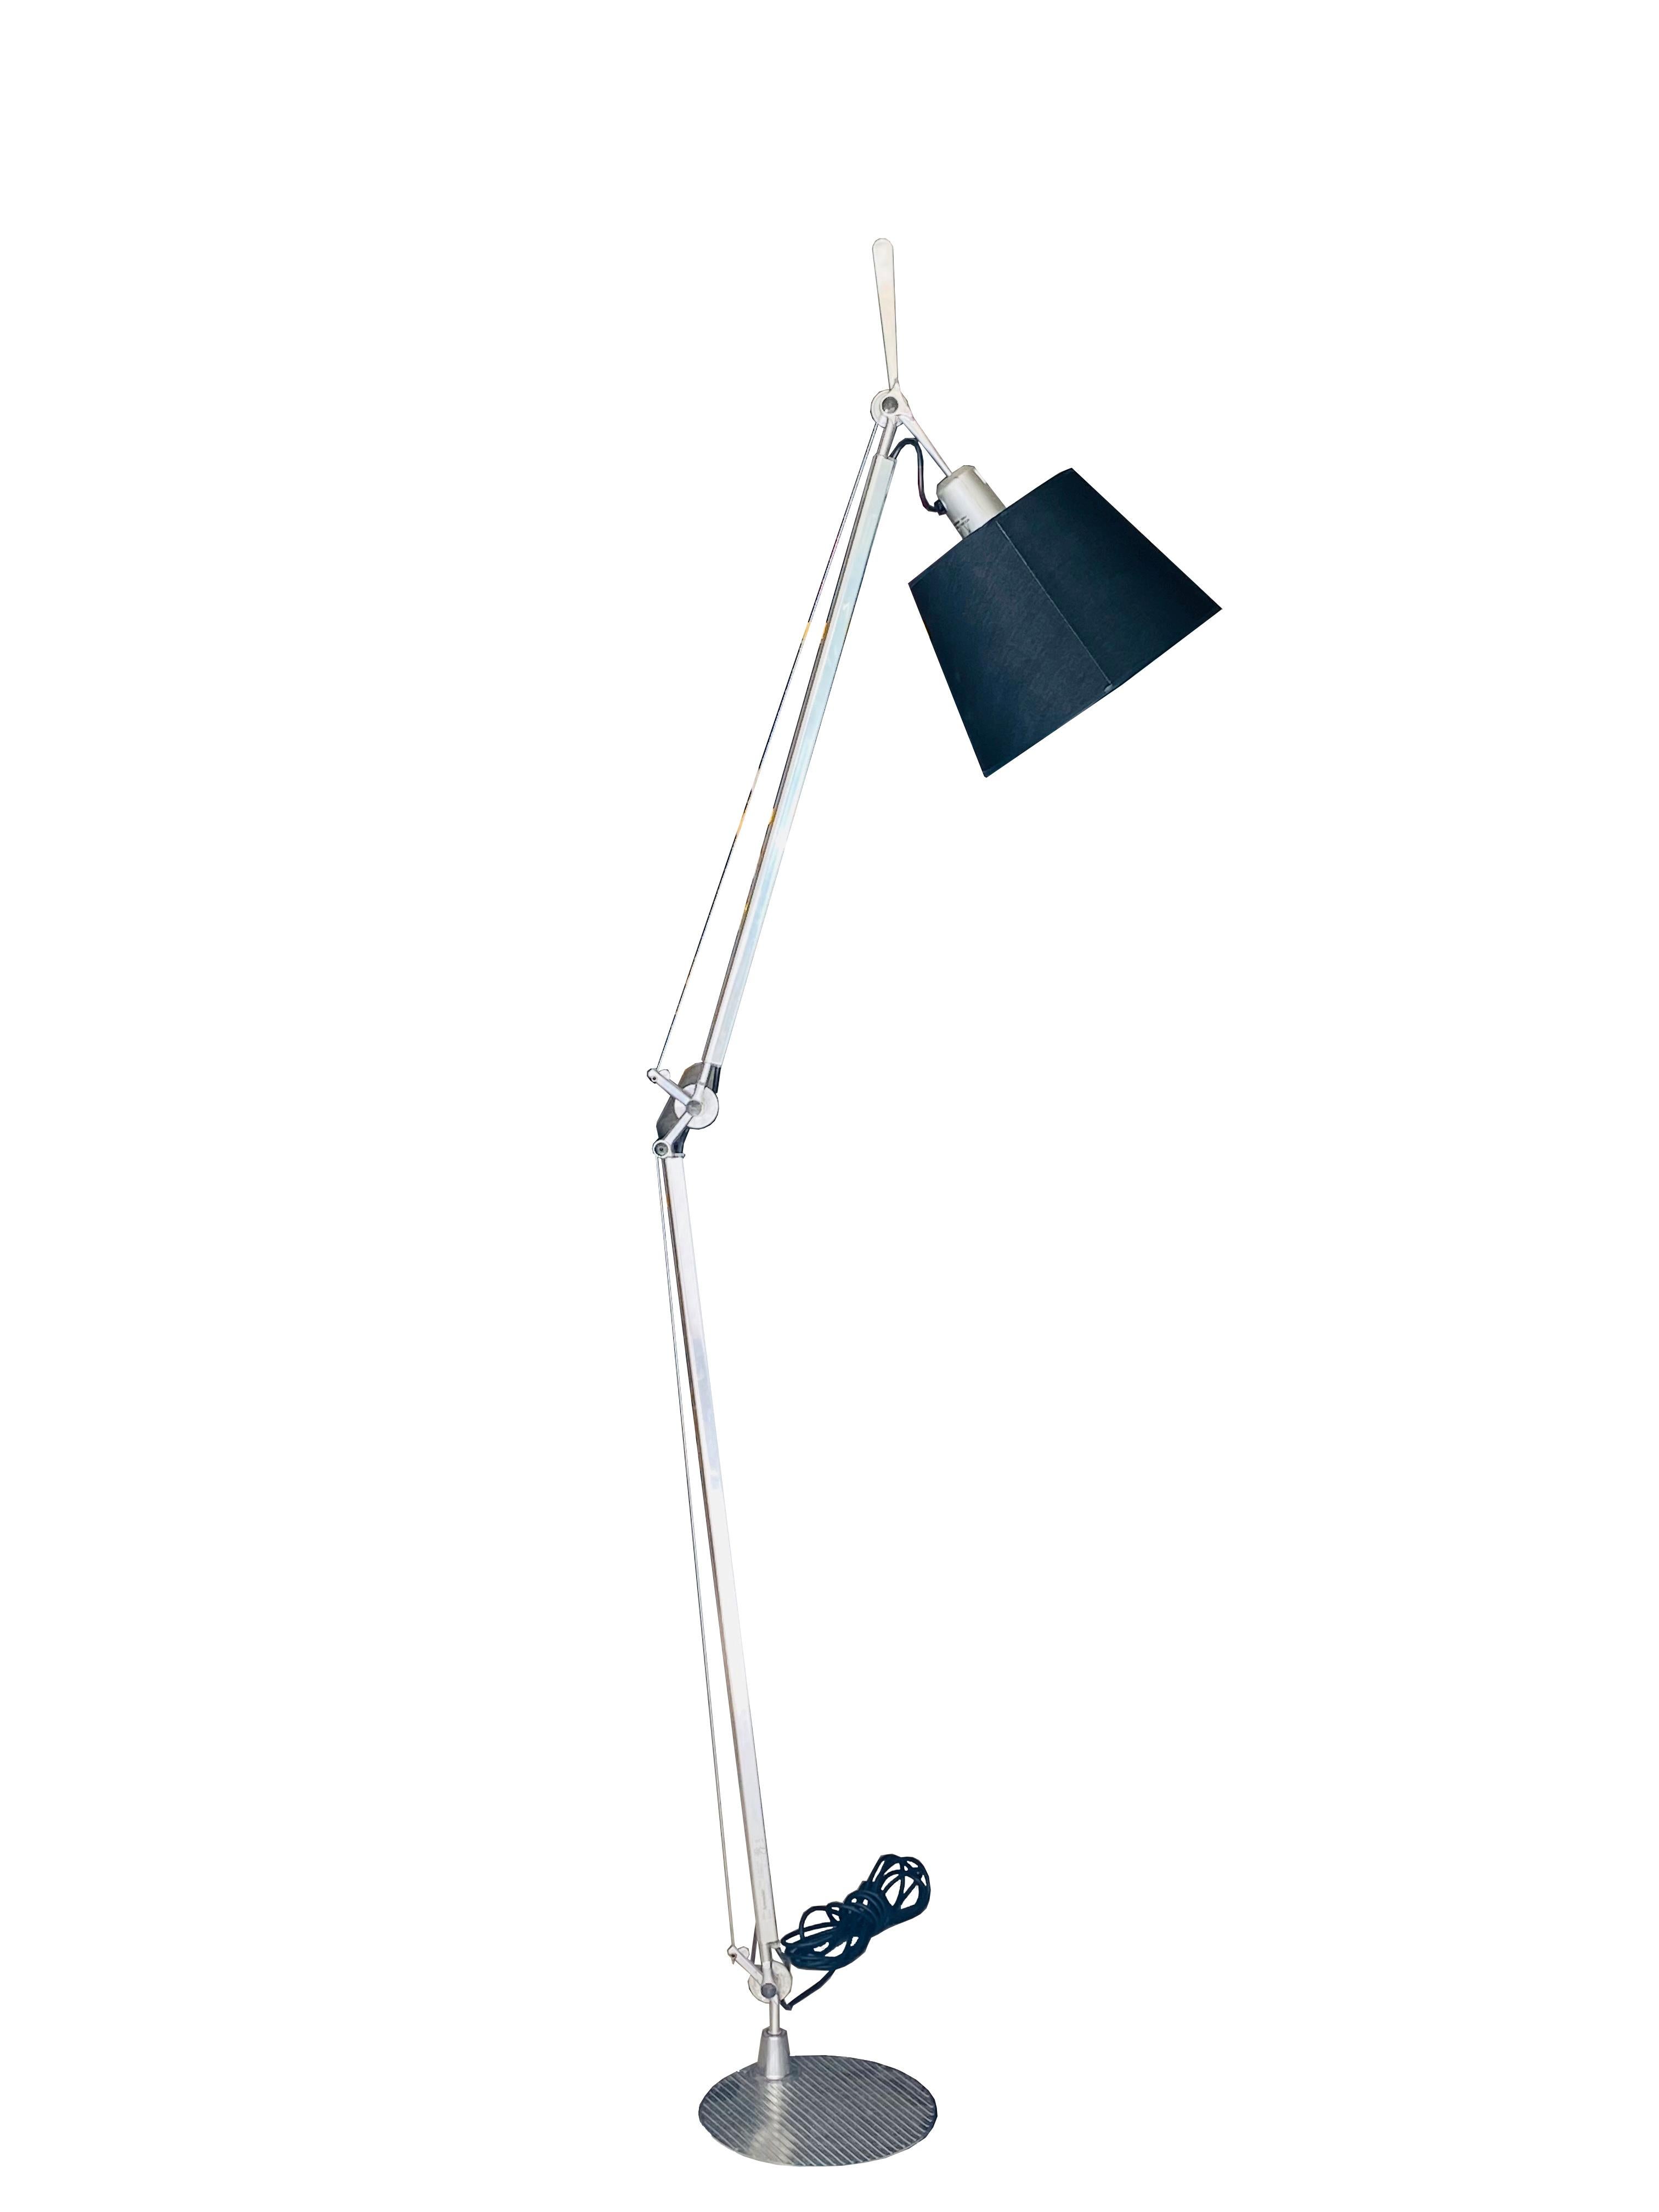 Tolomeo is a floor lamp of medium to large dimensions. An important floor lamp for a large living room or lounge where the movable arms allow customisation of the lamp's inclination.